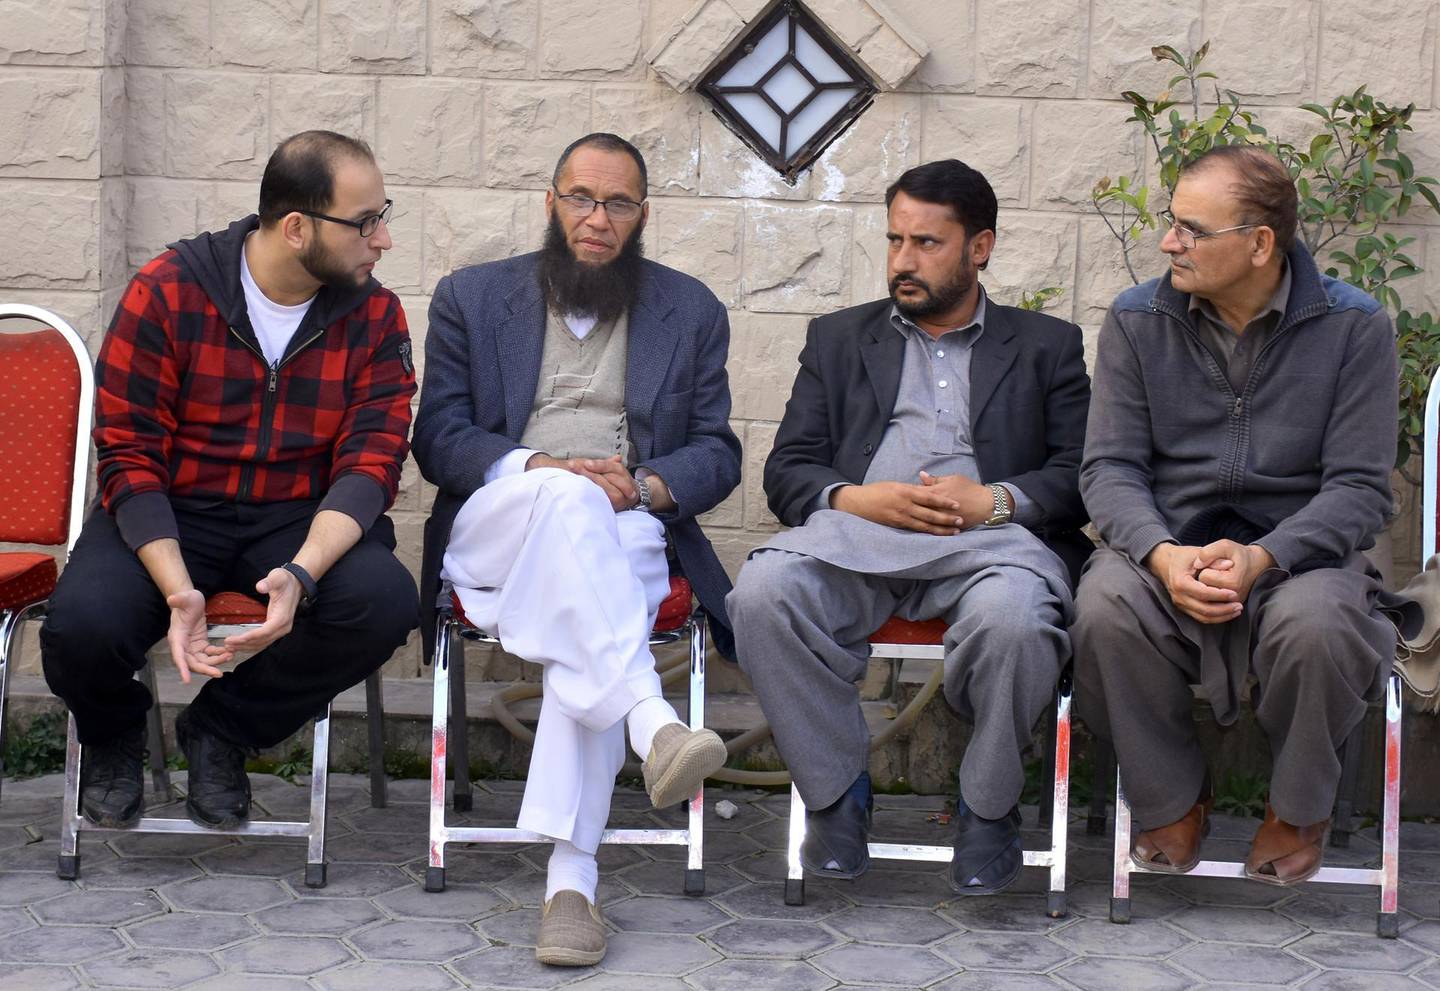 Relatives talk to Nadeem Rashid, second left, bother of a Pakistani citizen Rashid Naeem, who was reportedly killed along with and his son Talha Naeem in the Christchurch mosque shooting, at their home in Abbottabad, Pakistan, Saturday, March 16, 2019. Pakistan's foreign minister says nine Pakistanis were missing after the mass shootings at two mosques in the New Zealand city of Christchurch. (AP Photo/Aqeel Ahmed)